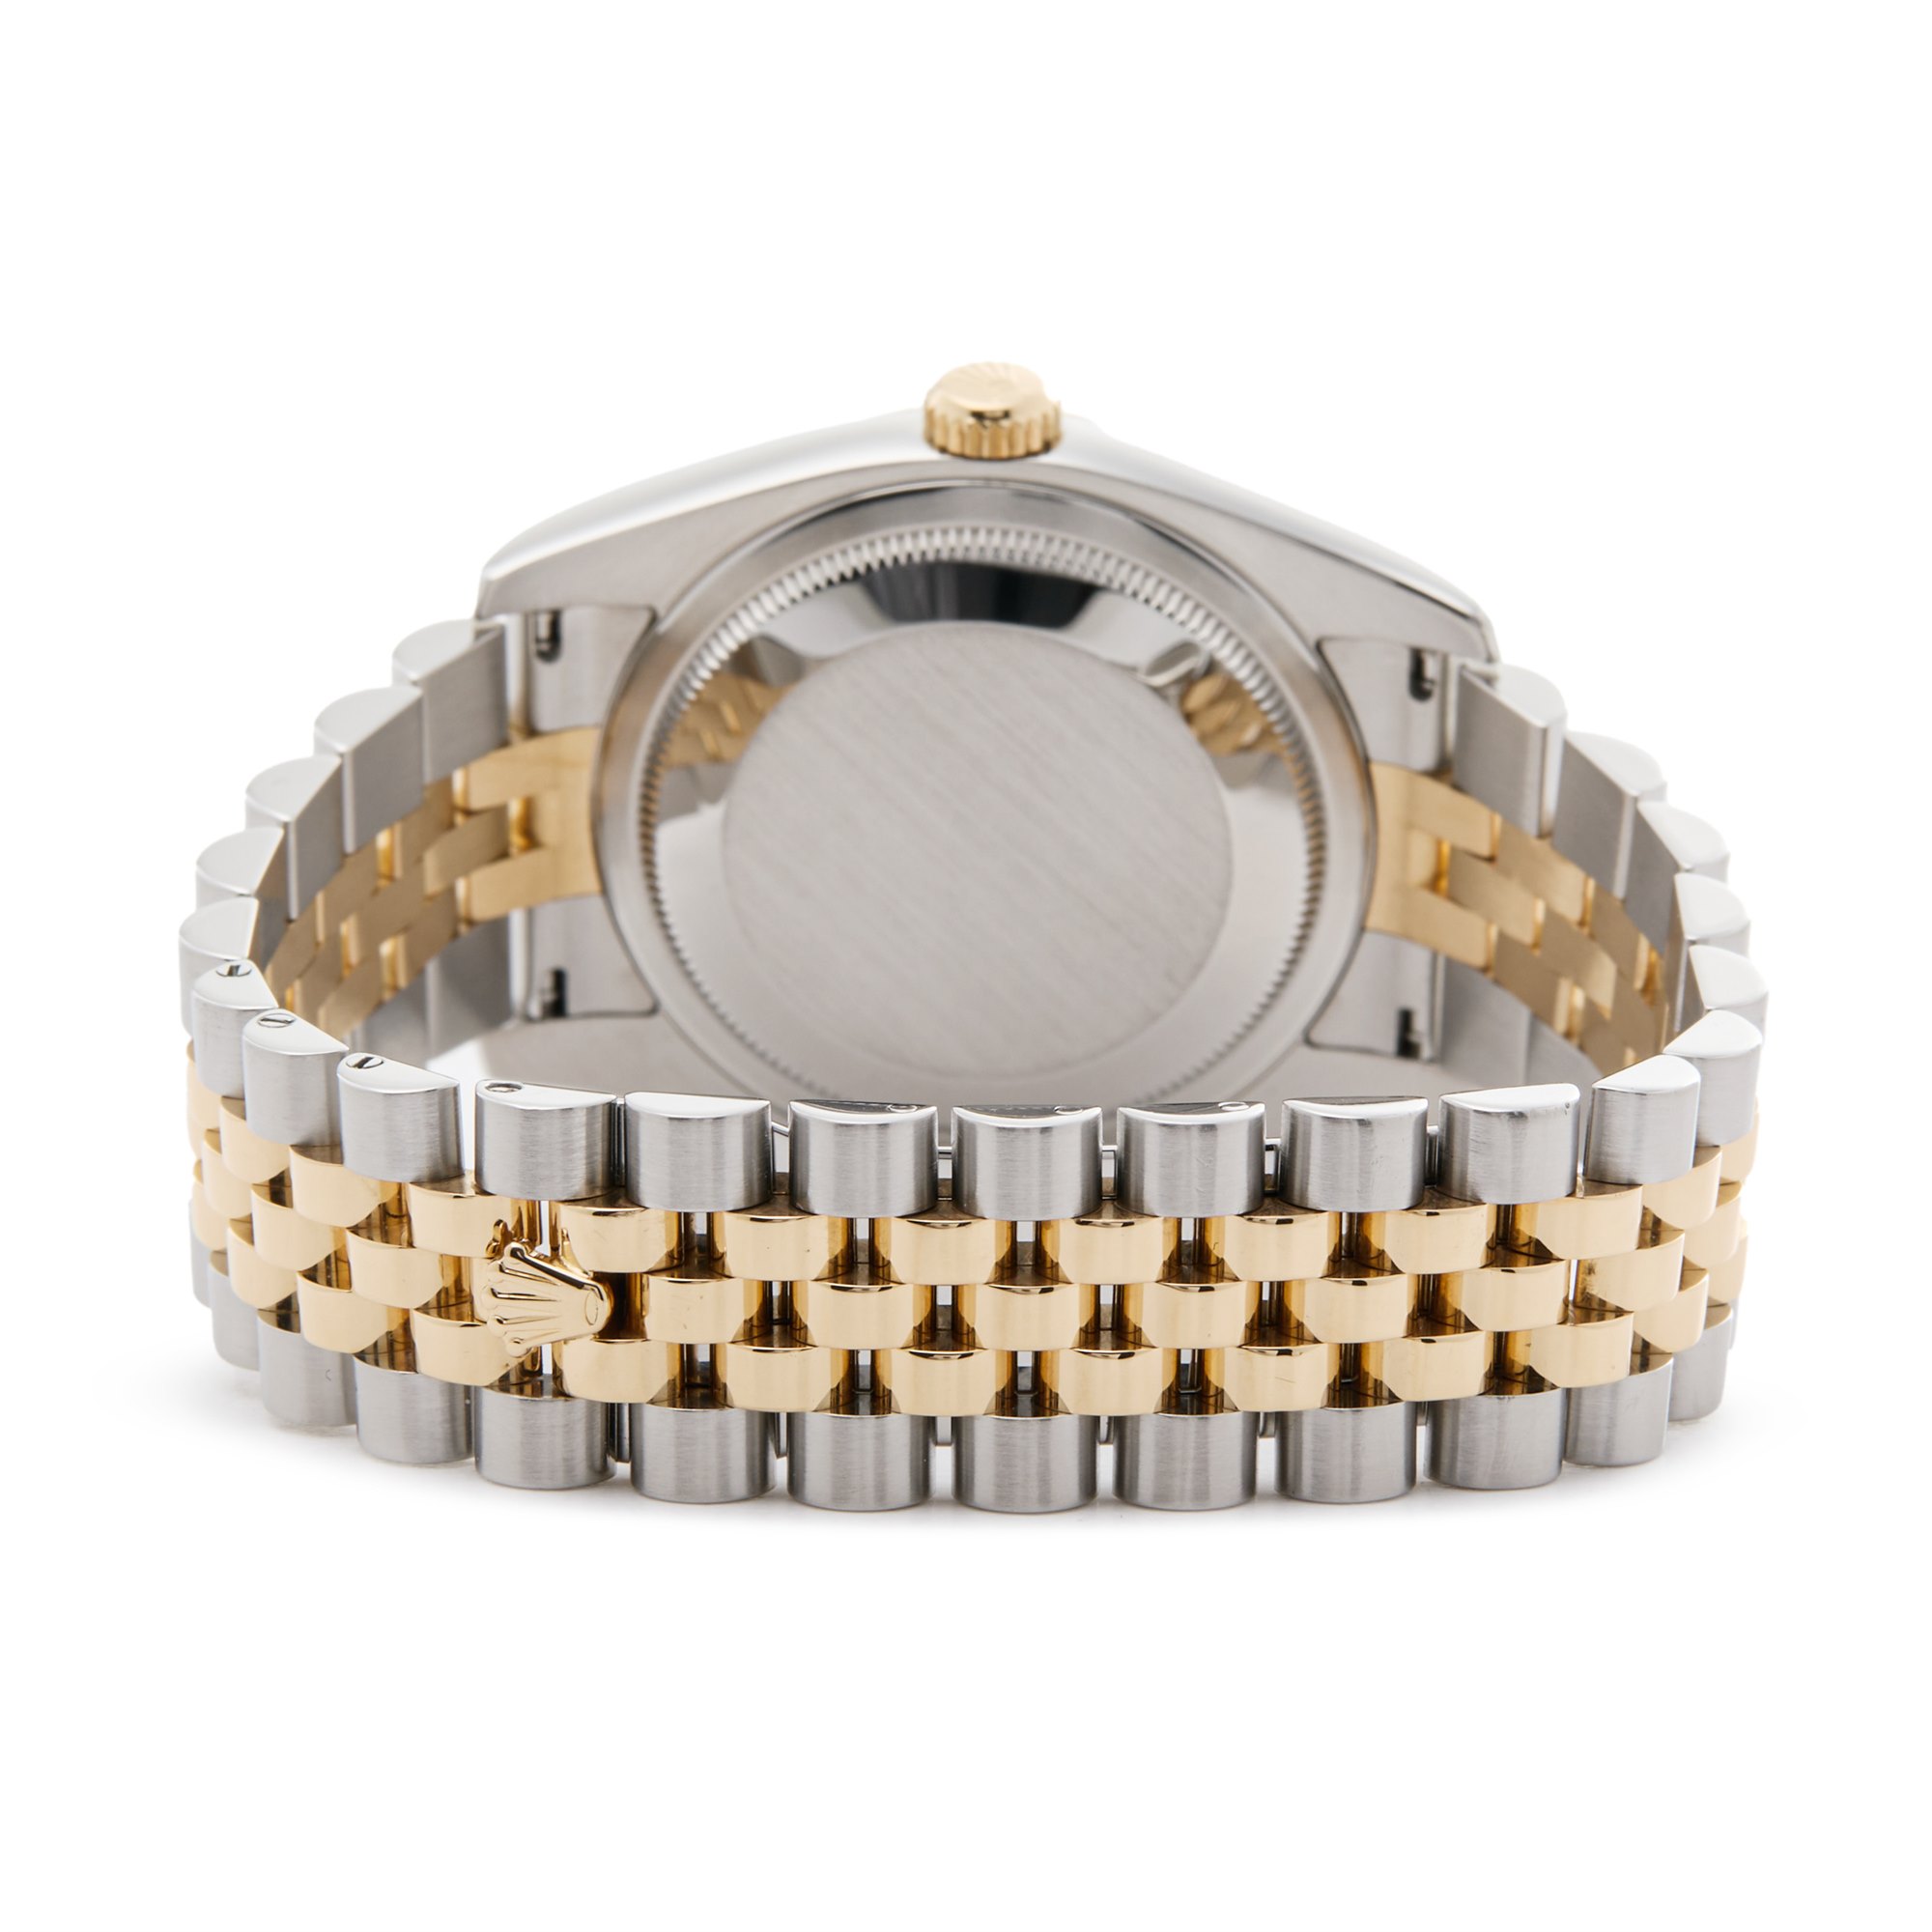 Rolex Datejust 36 Yellow Gold & Stainless Steel 116233